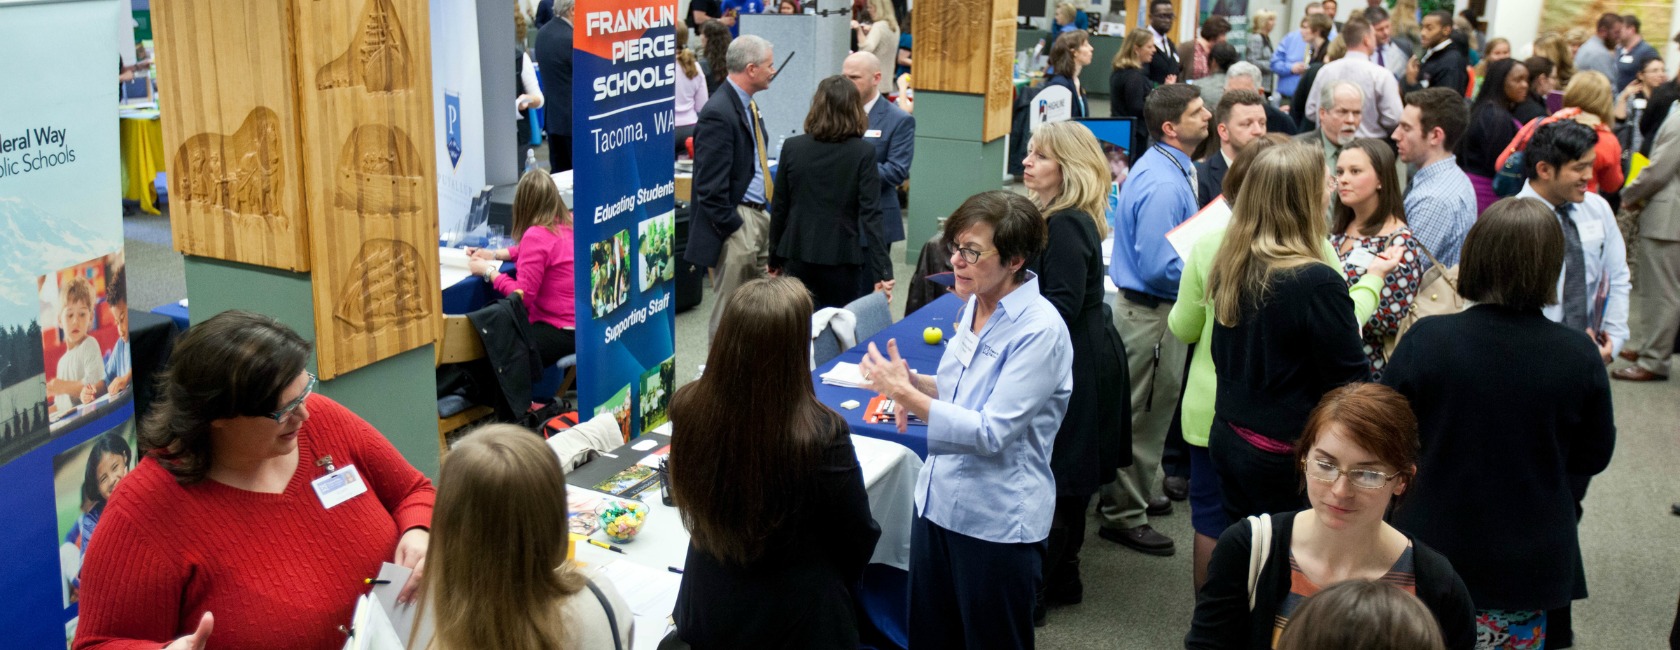 Students and employers connect at the Education Career Fair at PLU on March 18. (Photo: John Froschauer/PLU)